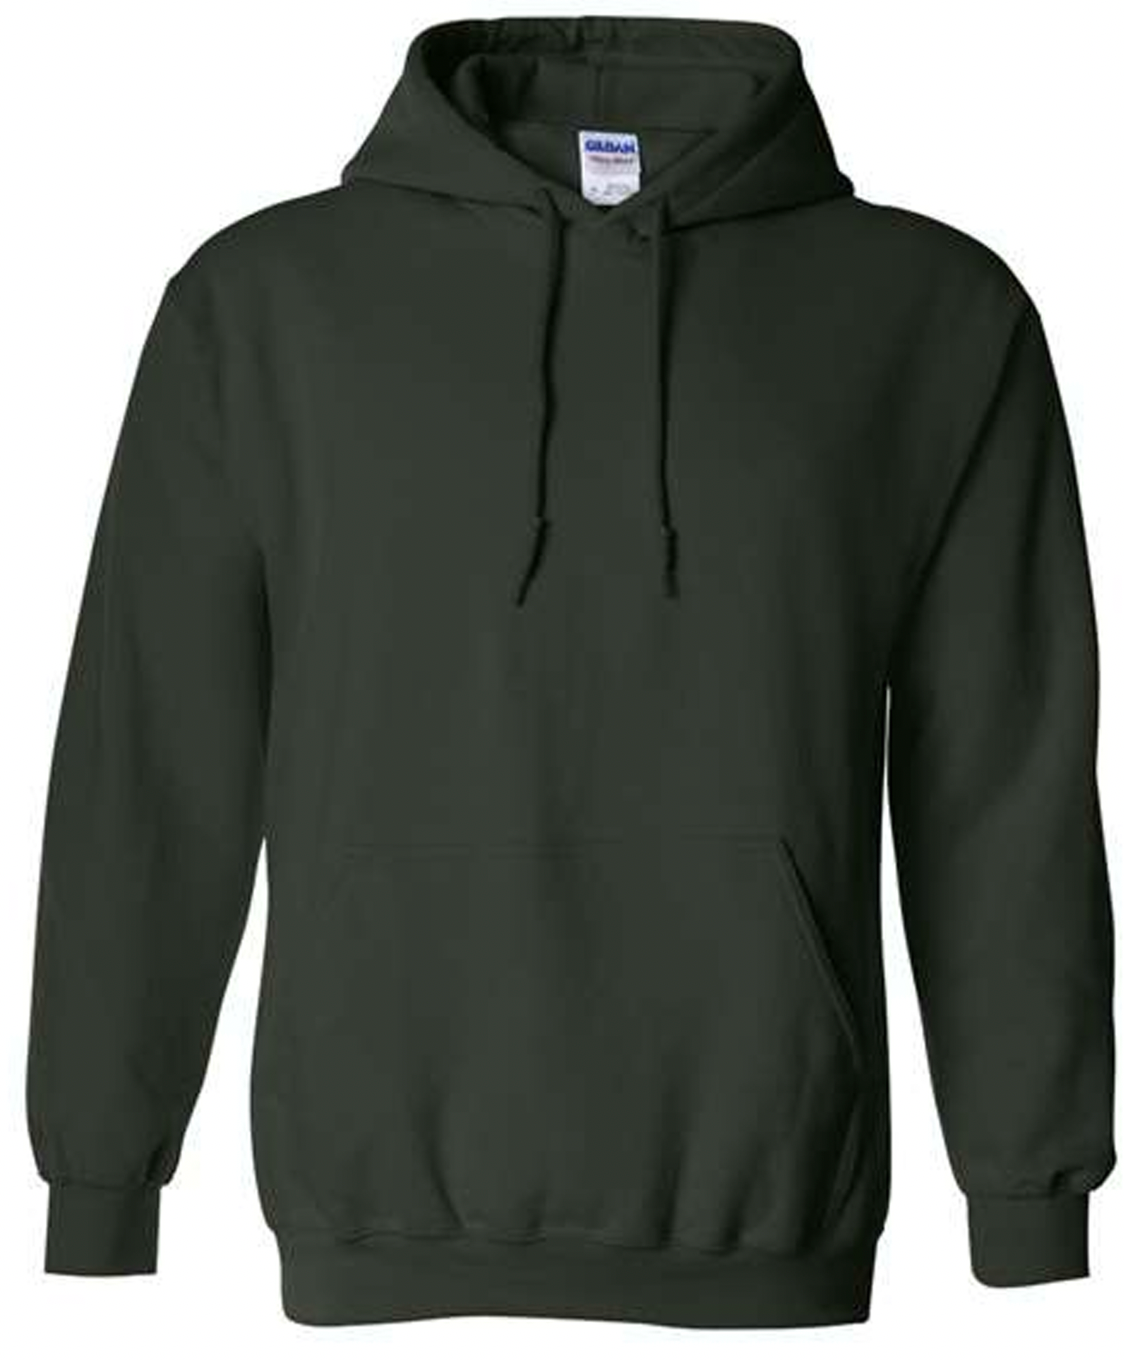 Full Chest Logo - Mary Hill - Integrated Services Hoodies